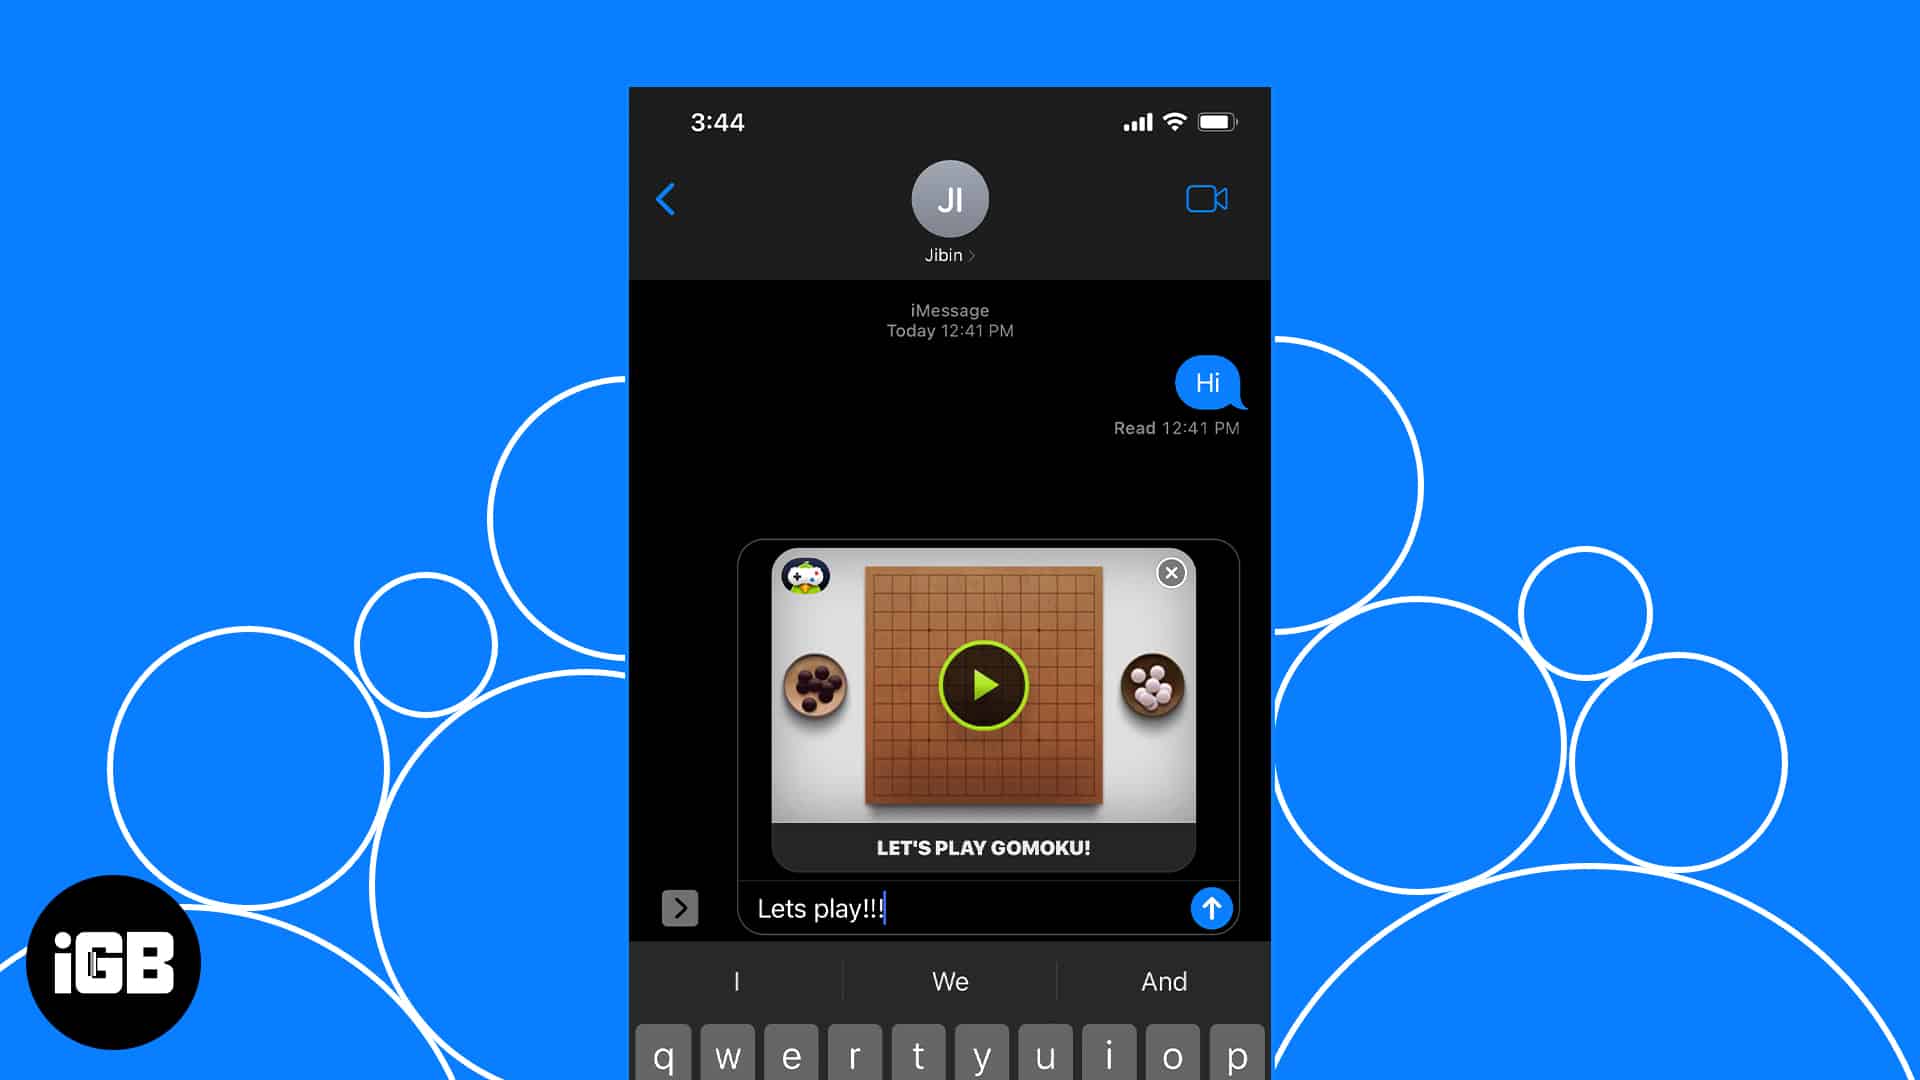 How to play Gomoku on iMessage in iOS 17